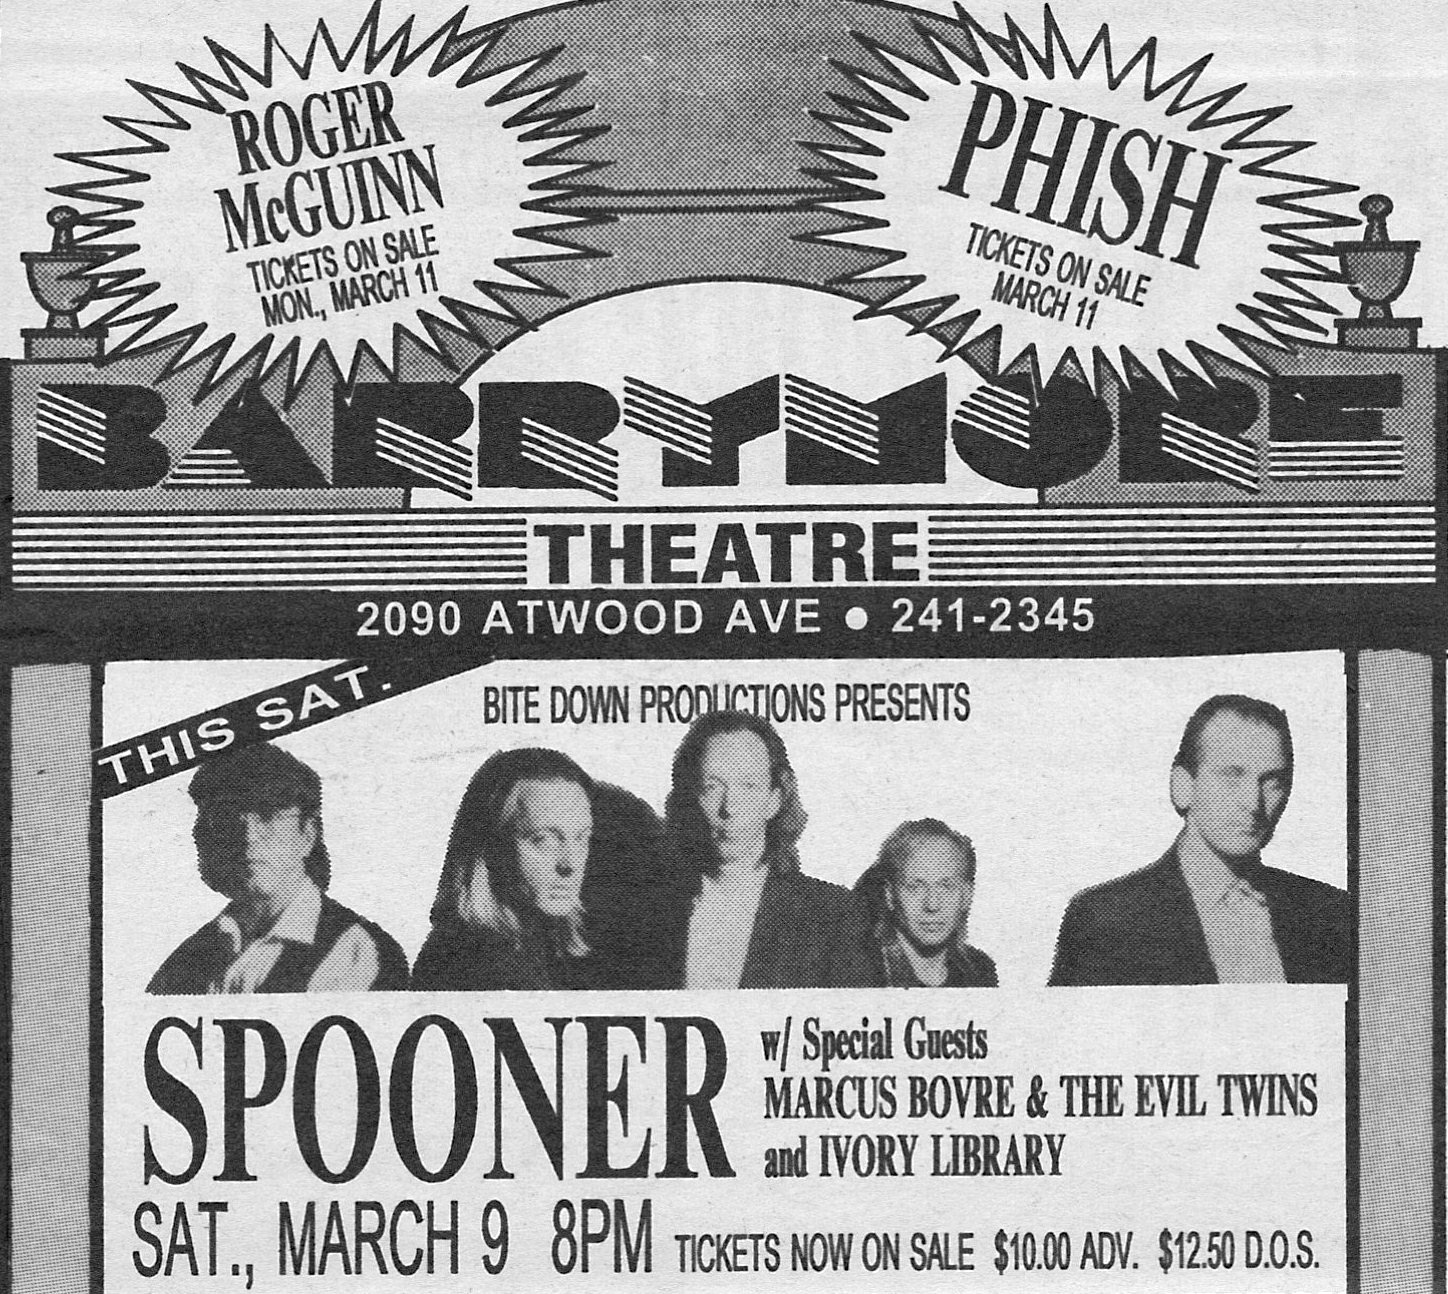 Marques Bovre and the Evil Twins opening for Spooner, March 9, 1991